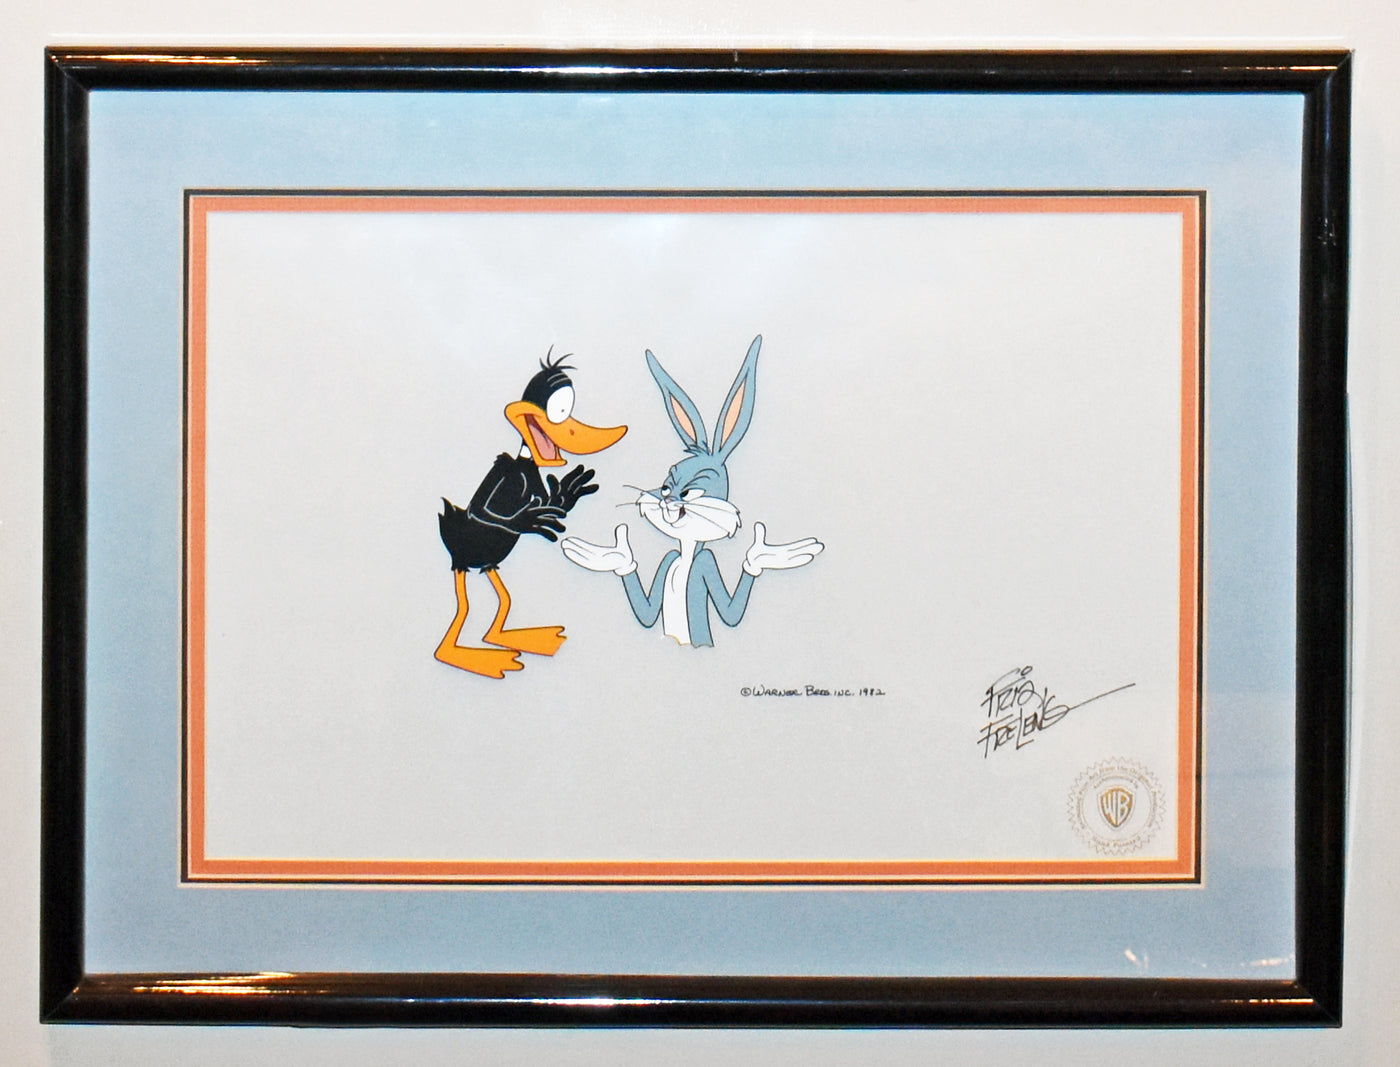 Original Warner Brothers Production Cel Featuring Bugs Bunny and Daffy Duck, Signed by Friz Freleng